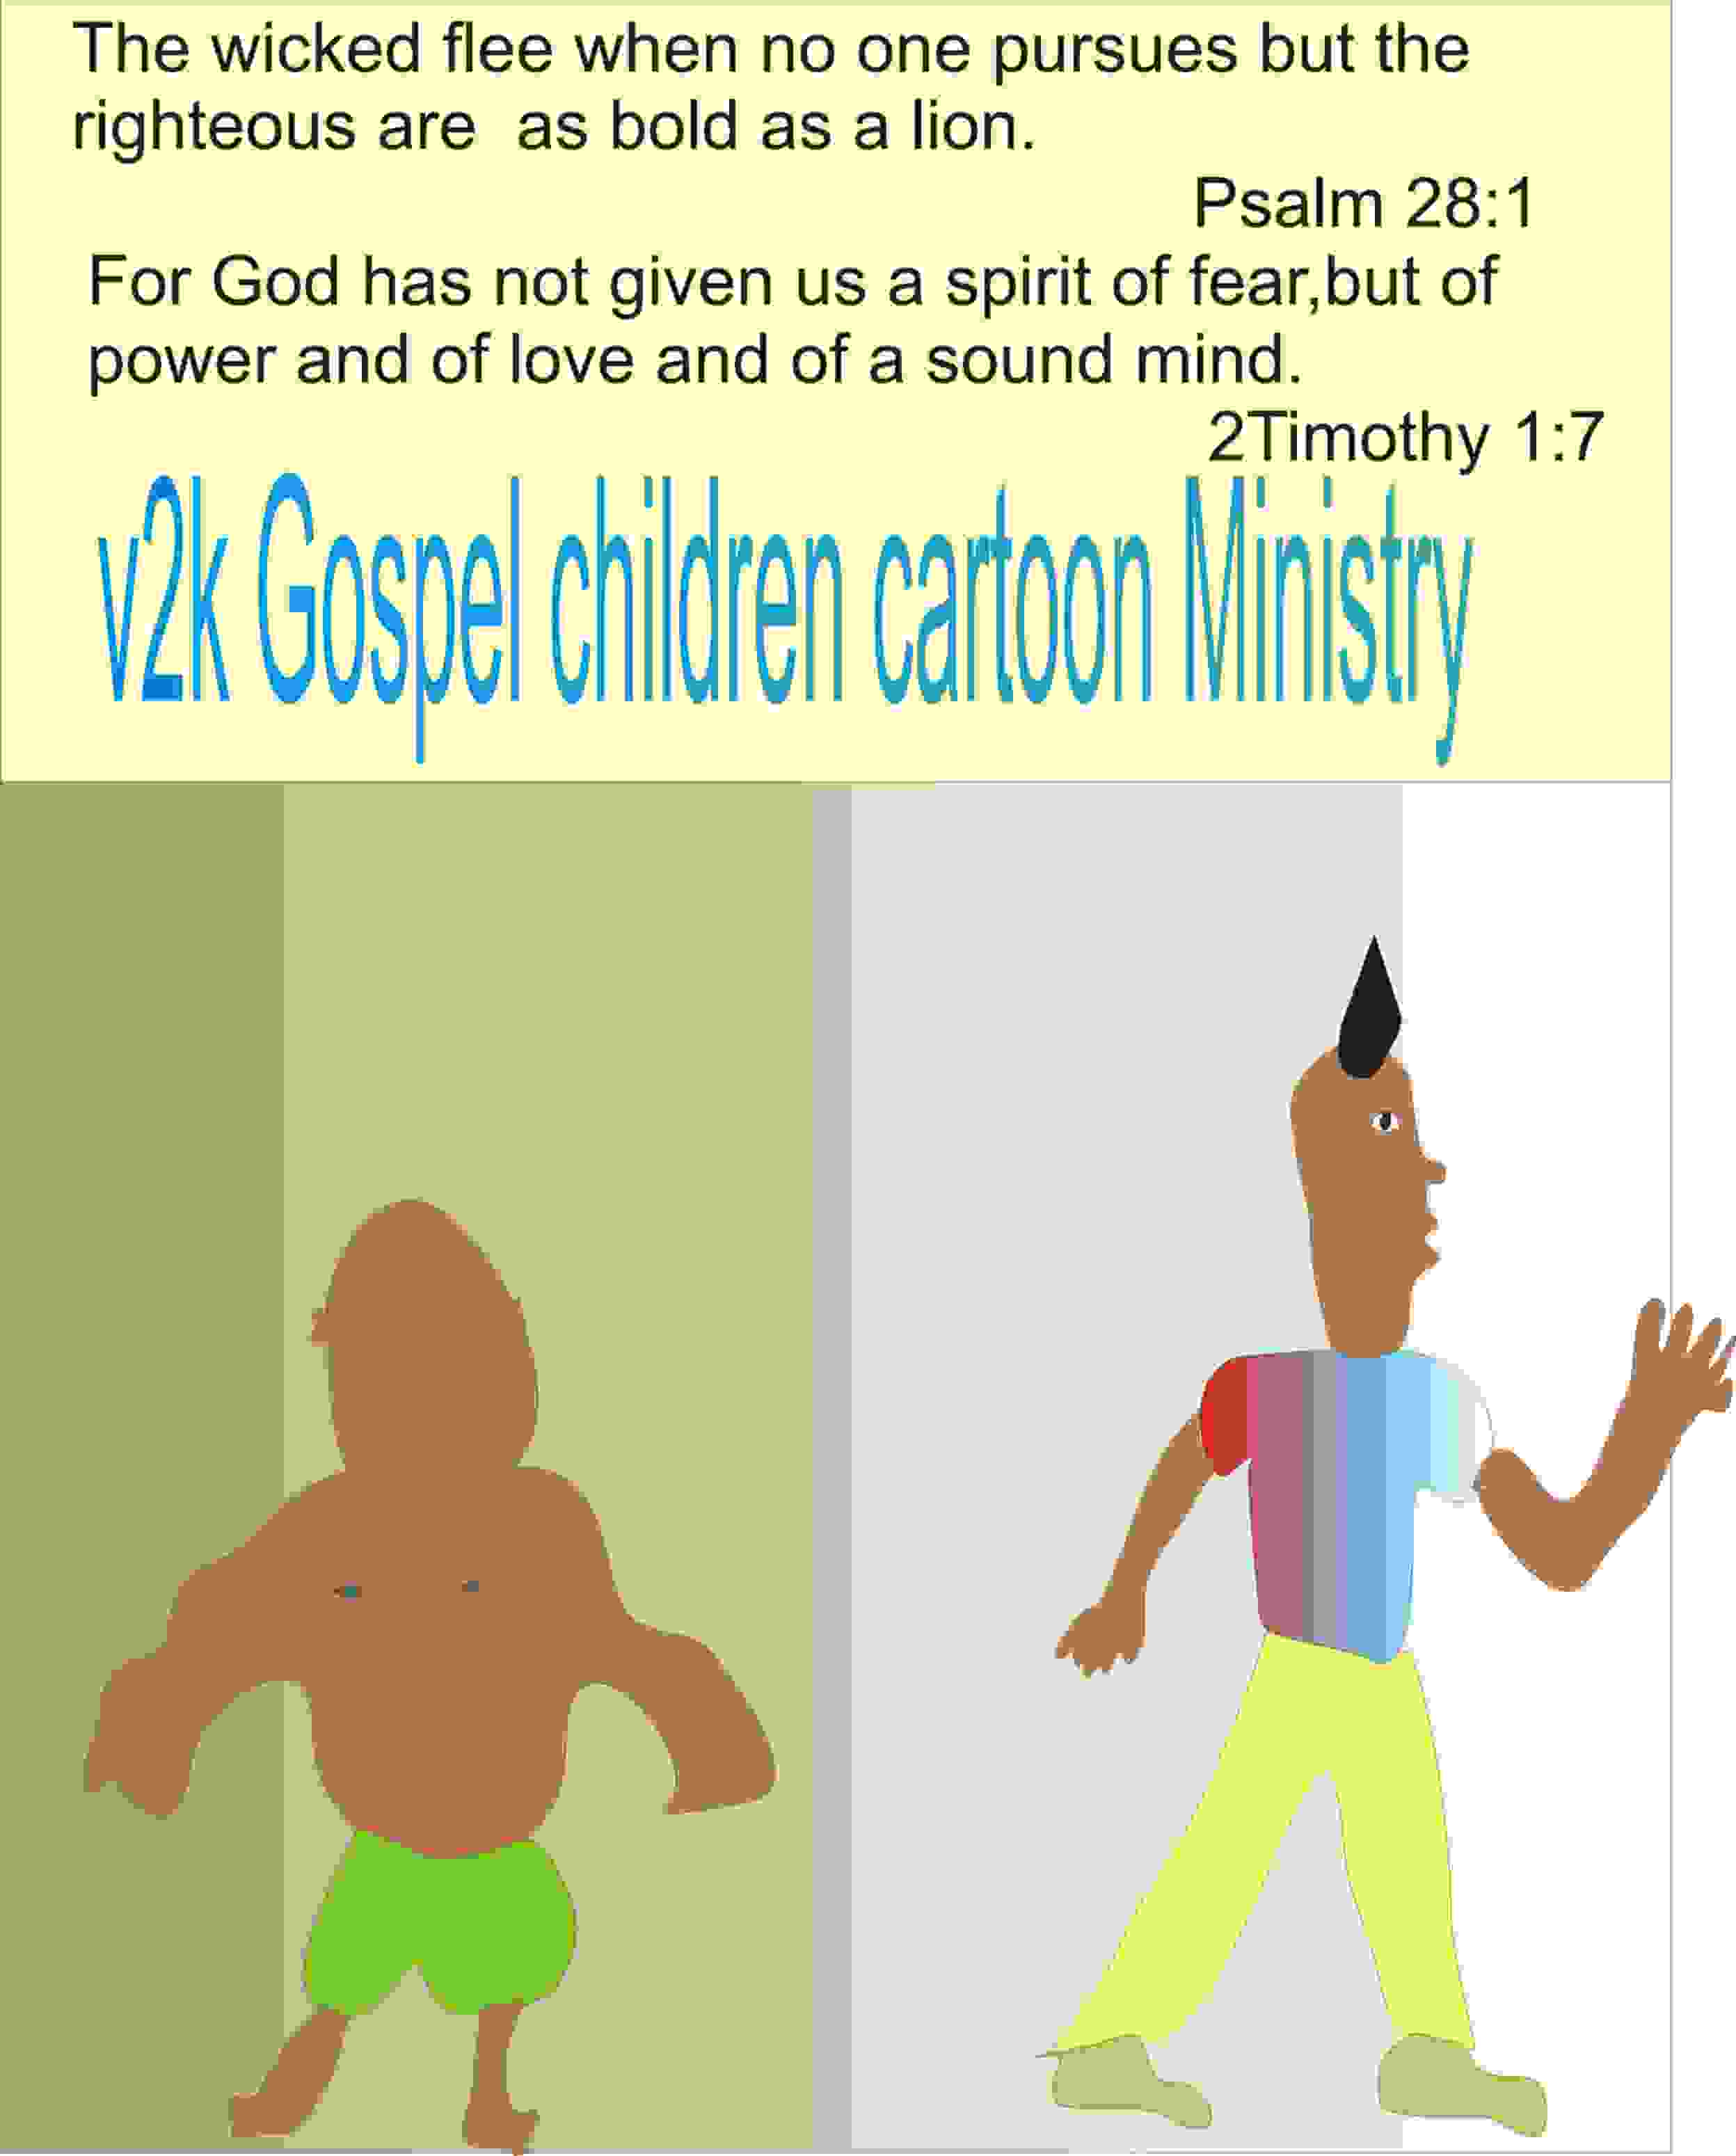 Be drawing 30 christian cartoons for you each month by Vittu_inspires |  Fiverr